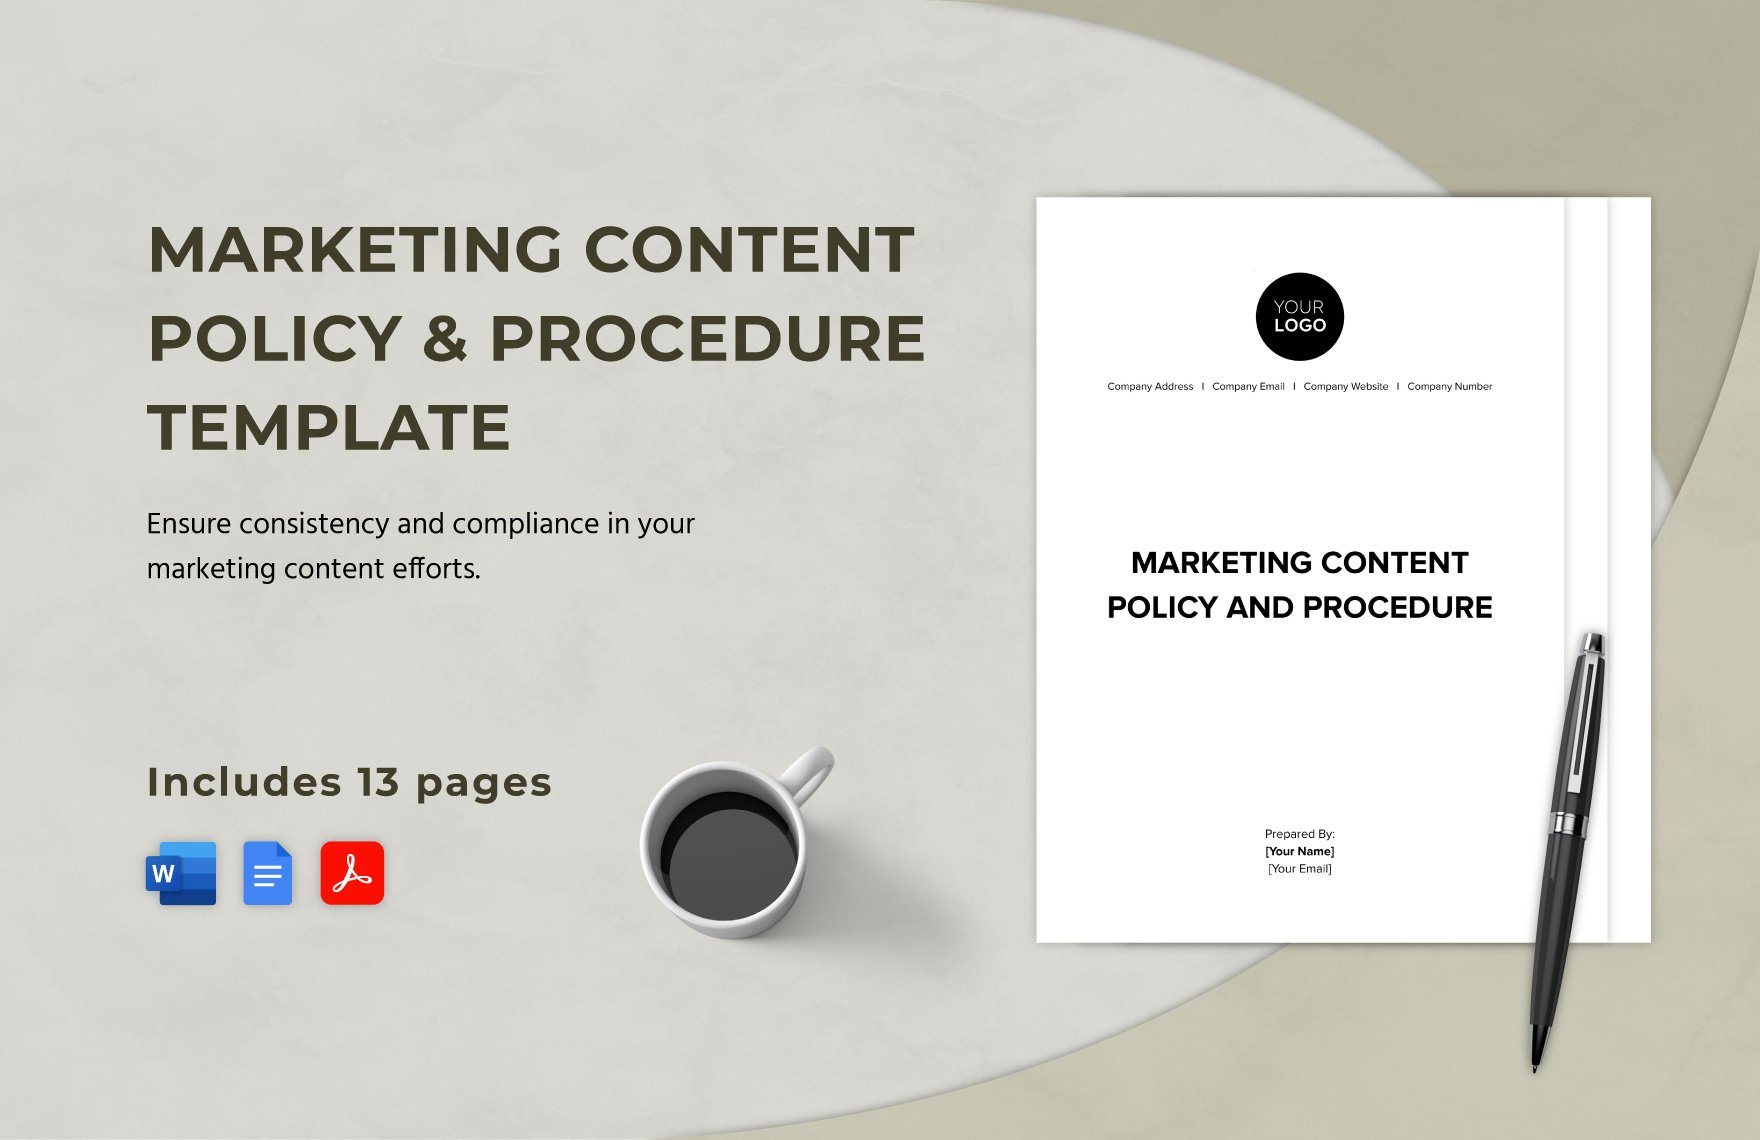 Marketing Content Policy & Procedure Template